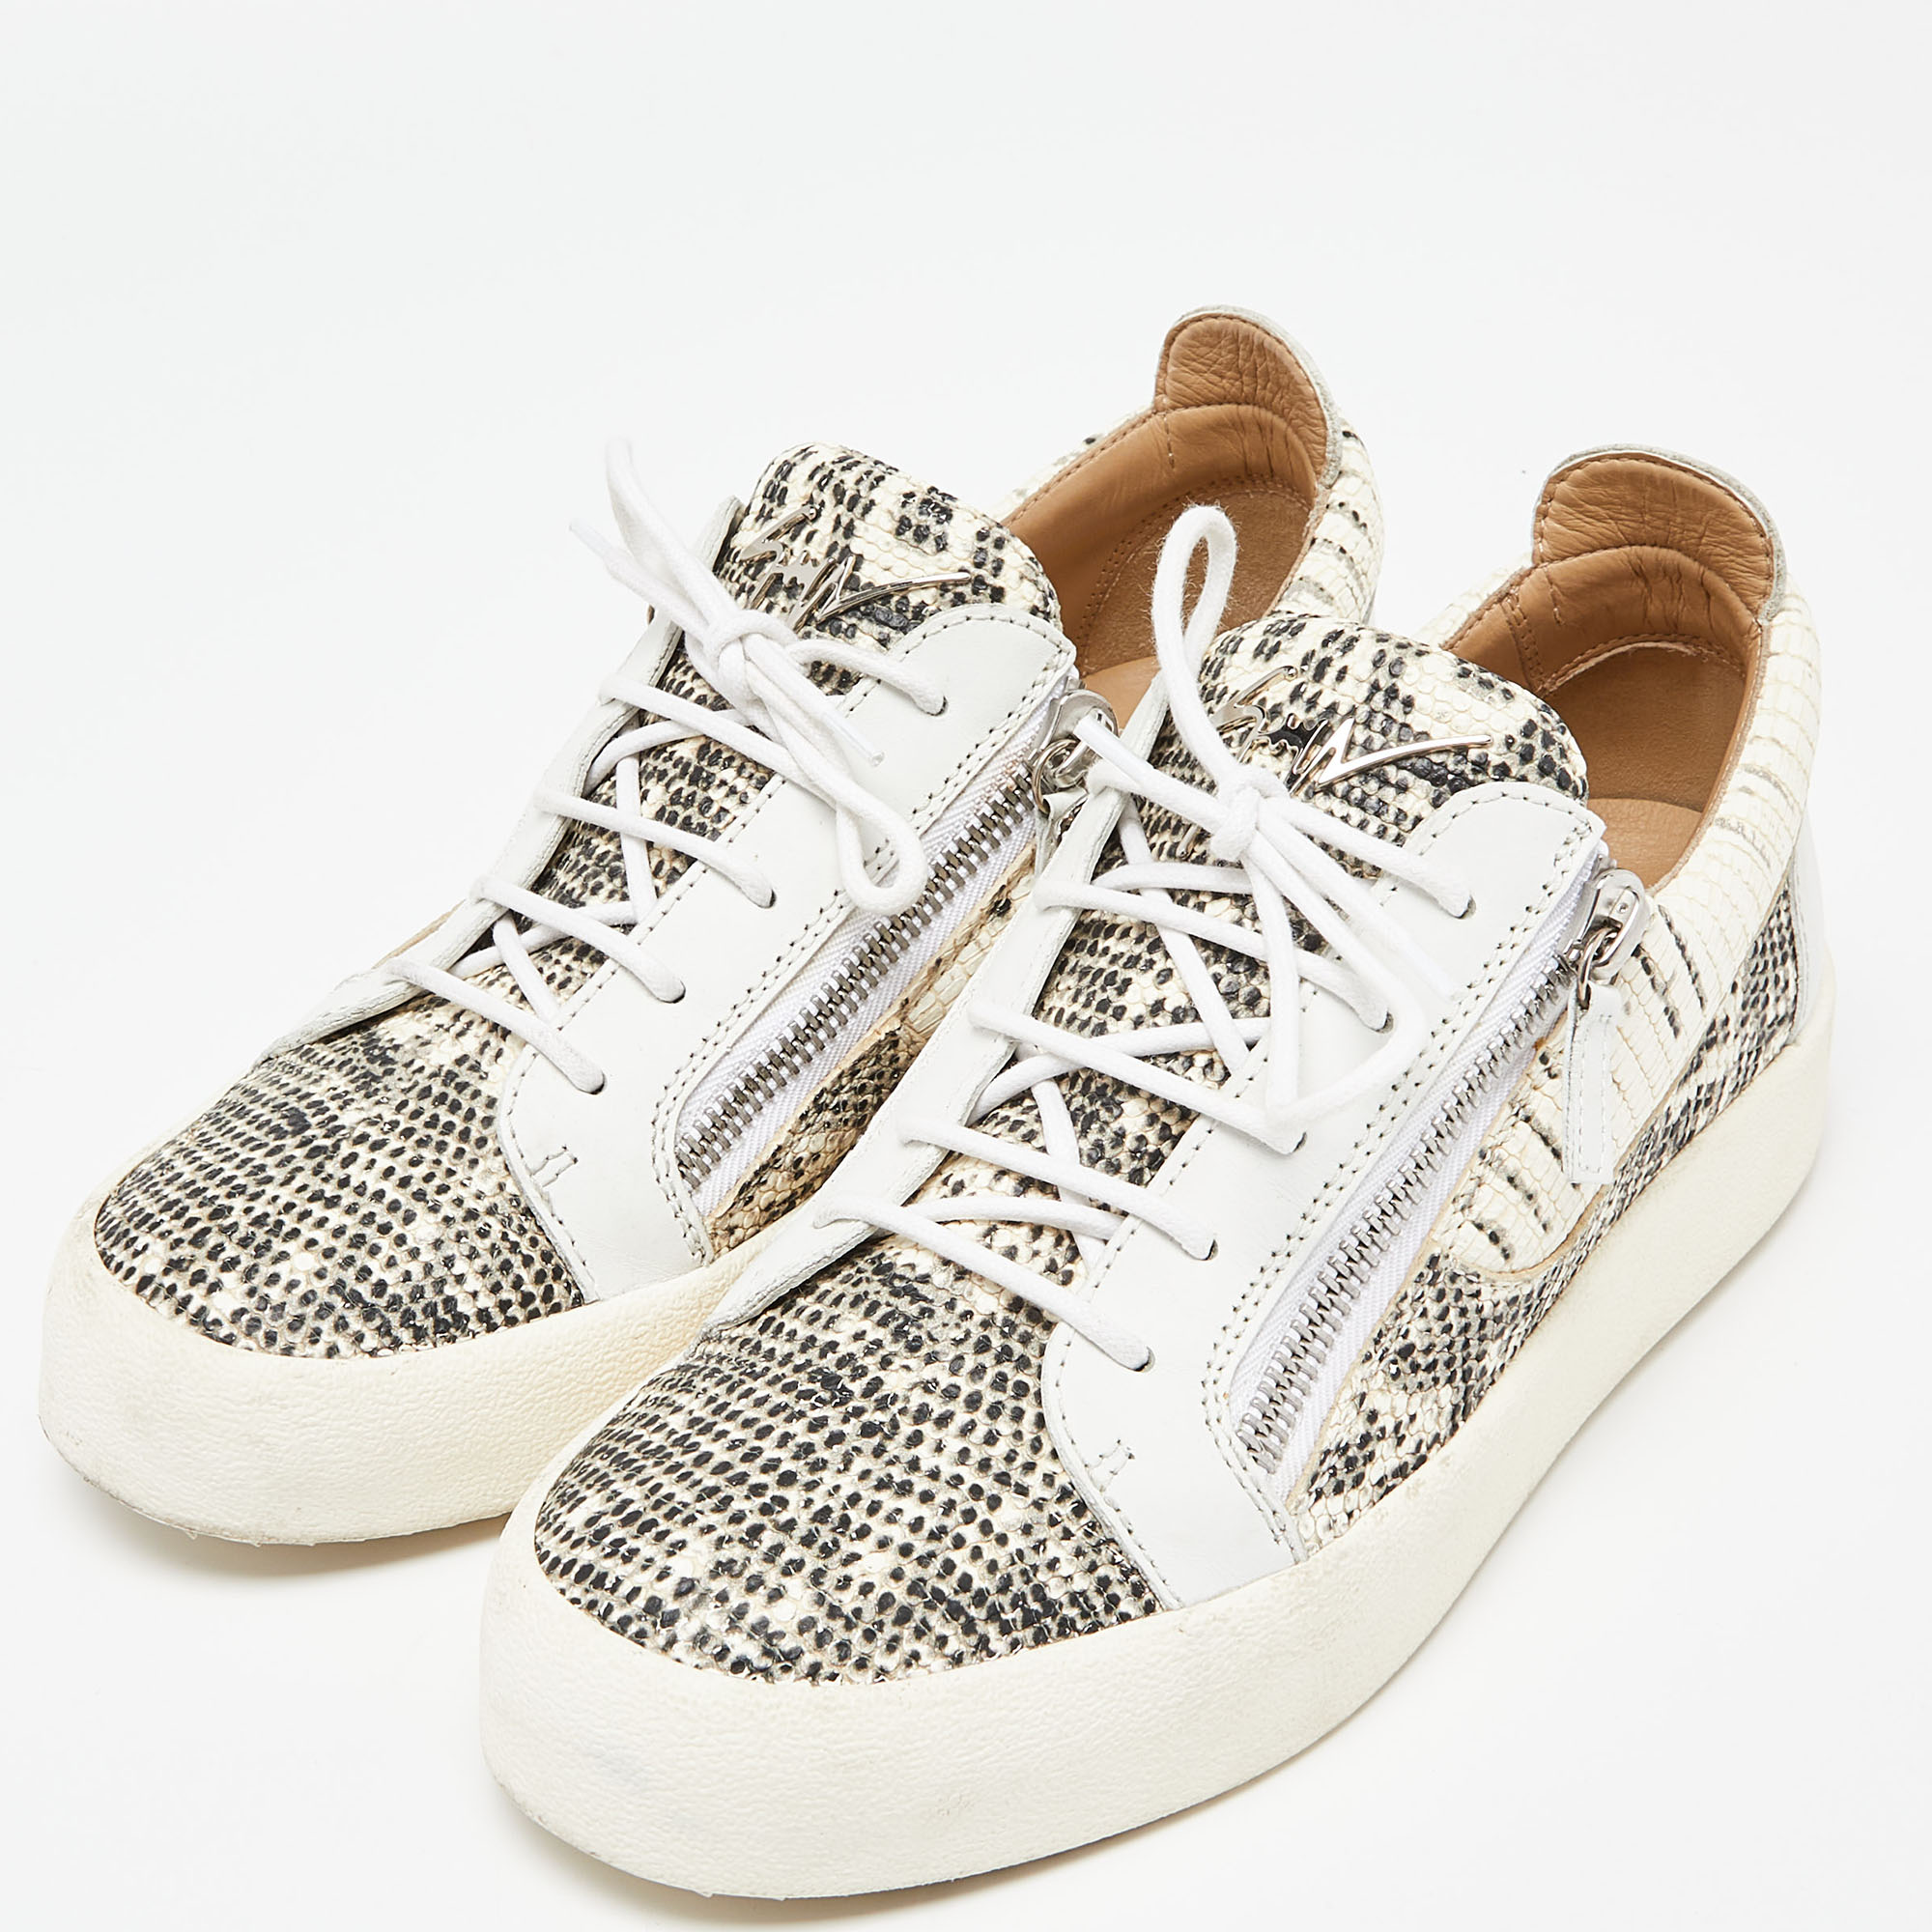 

Giuseppe Zanotti White/Beige Lizard Embossed and Leather Frankie Sneakers Size